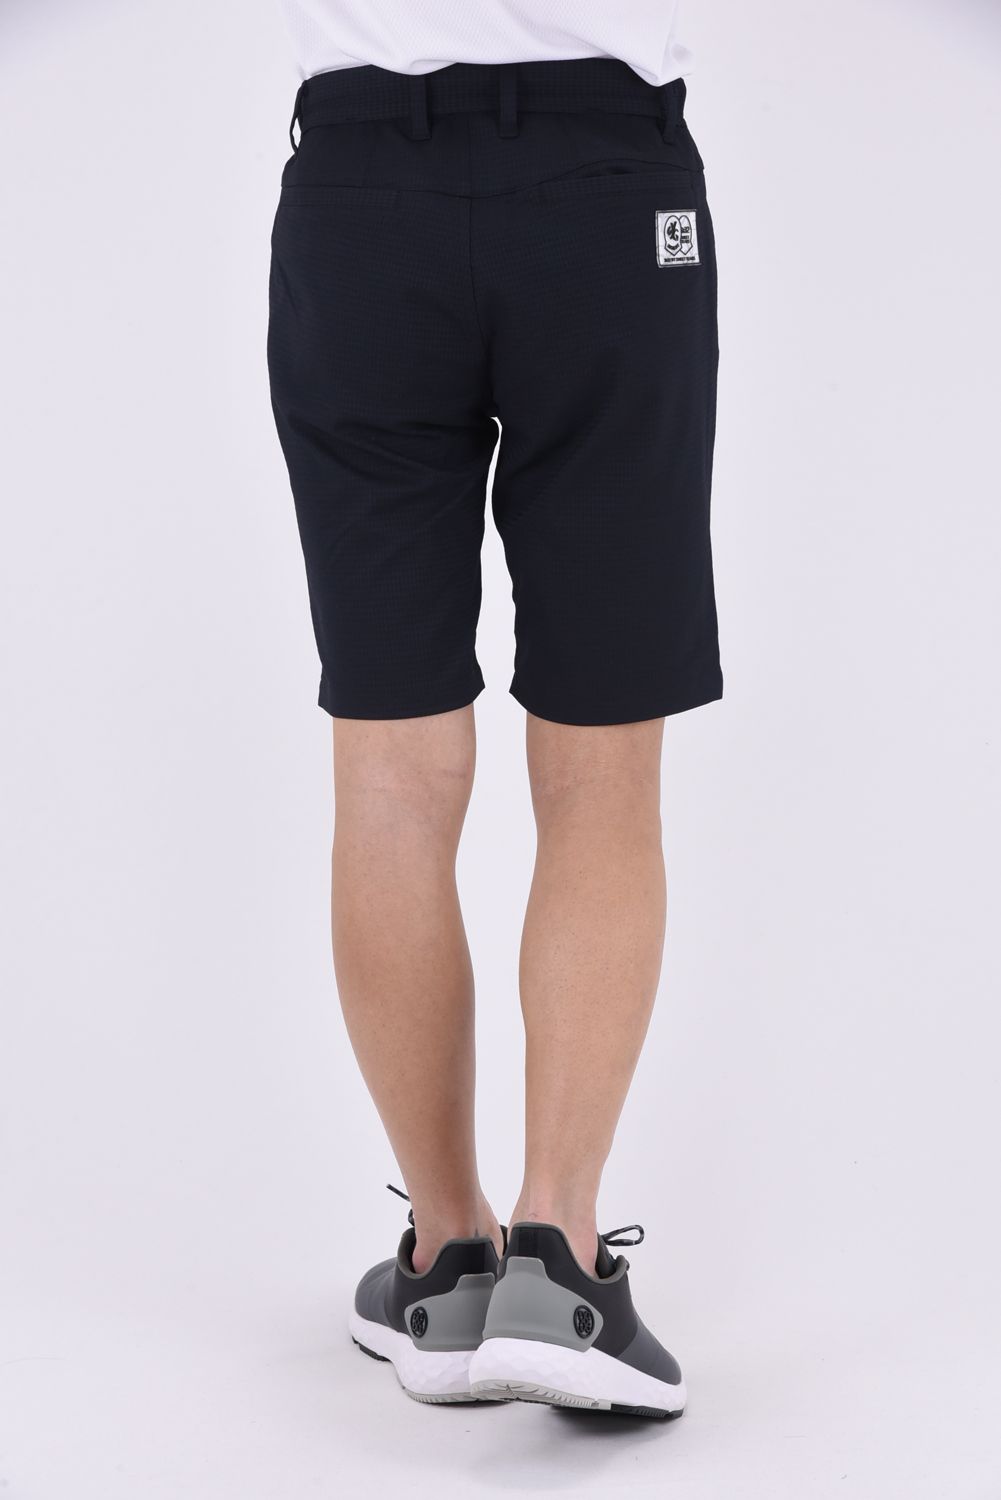 SY32 by SWEET YEARS GOLF - 【ABSOLUTE】 DRY STRETCH CHIDORI JQ 